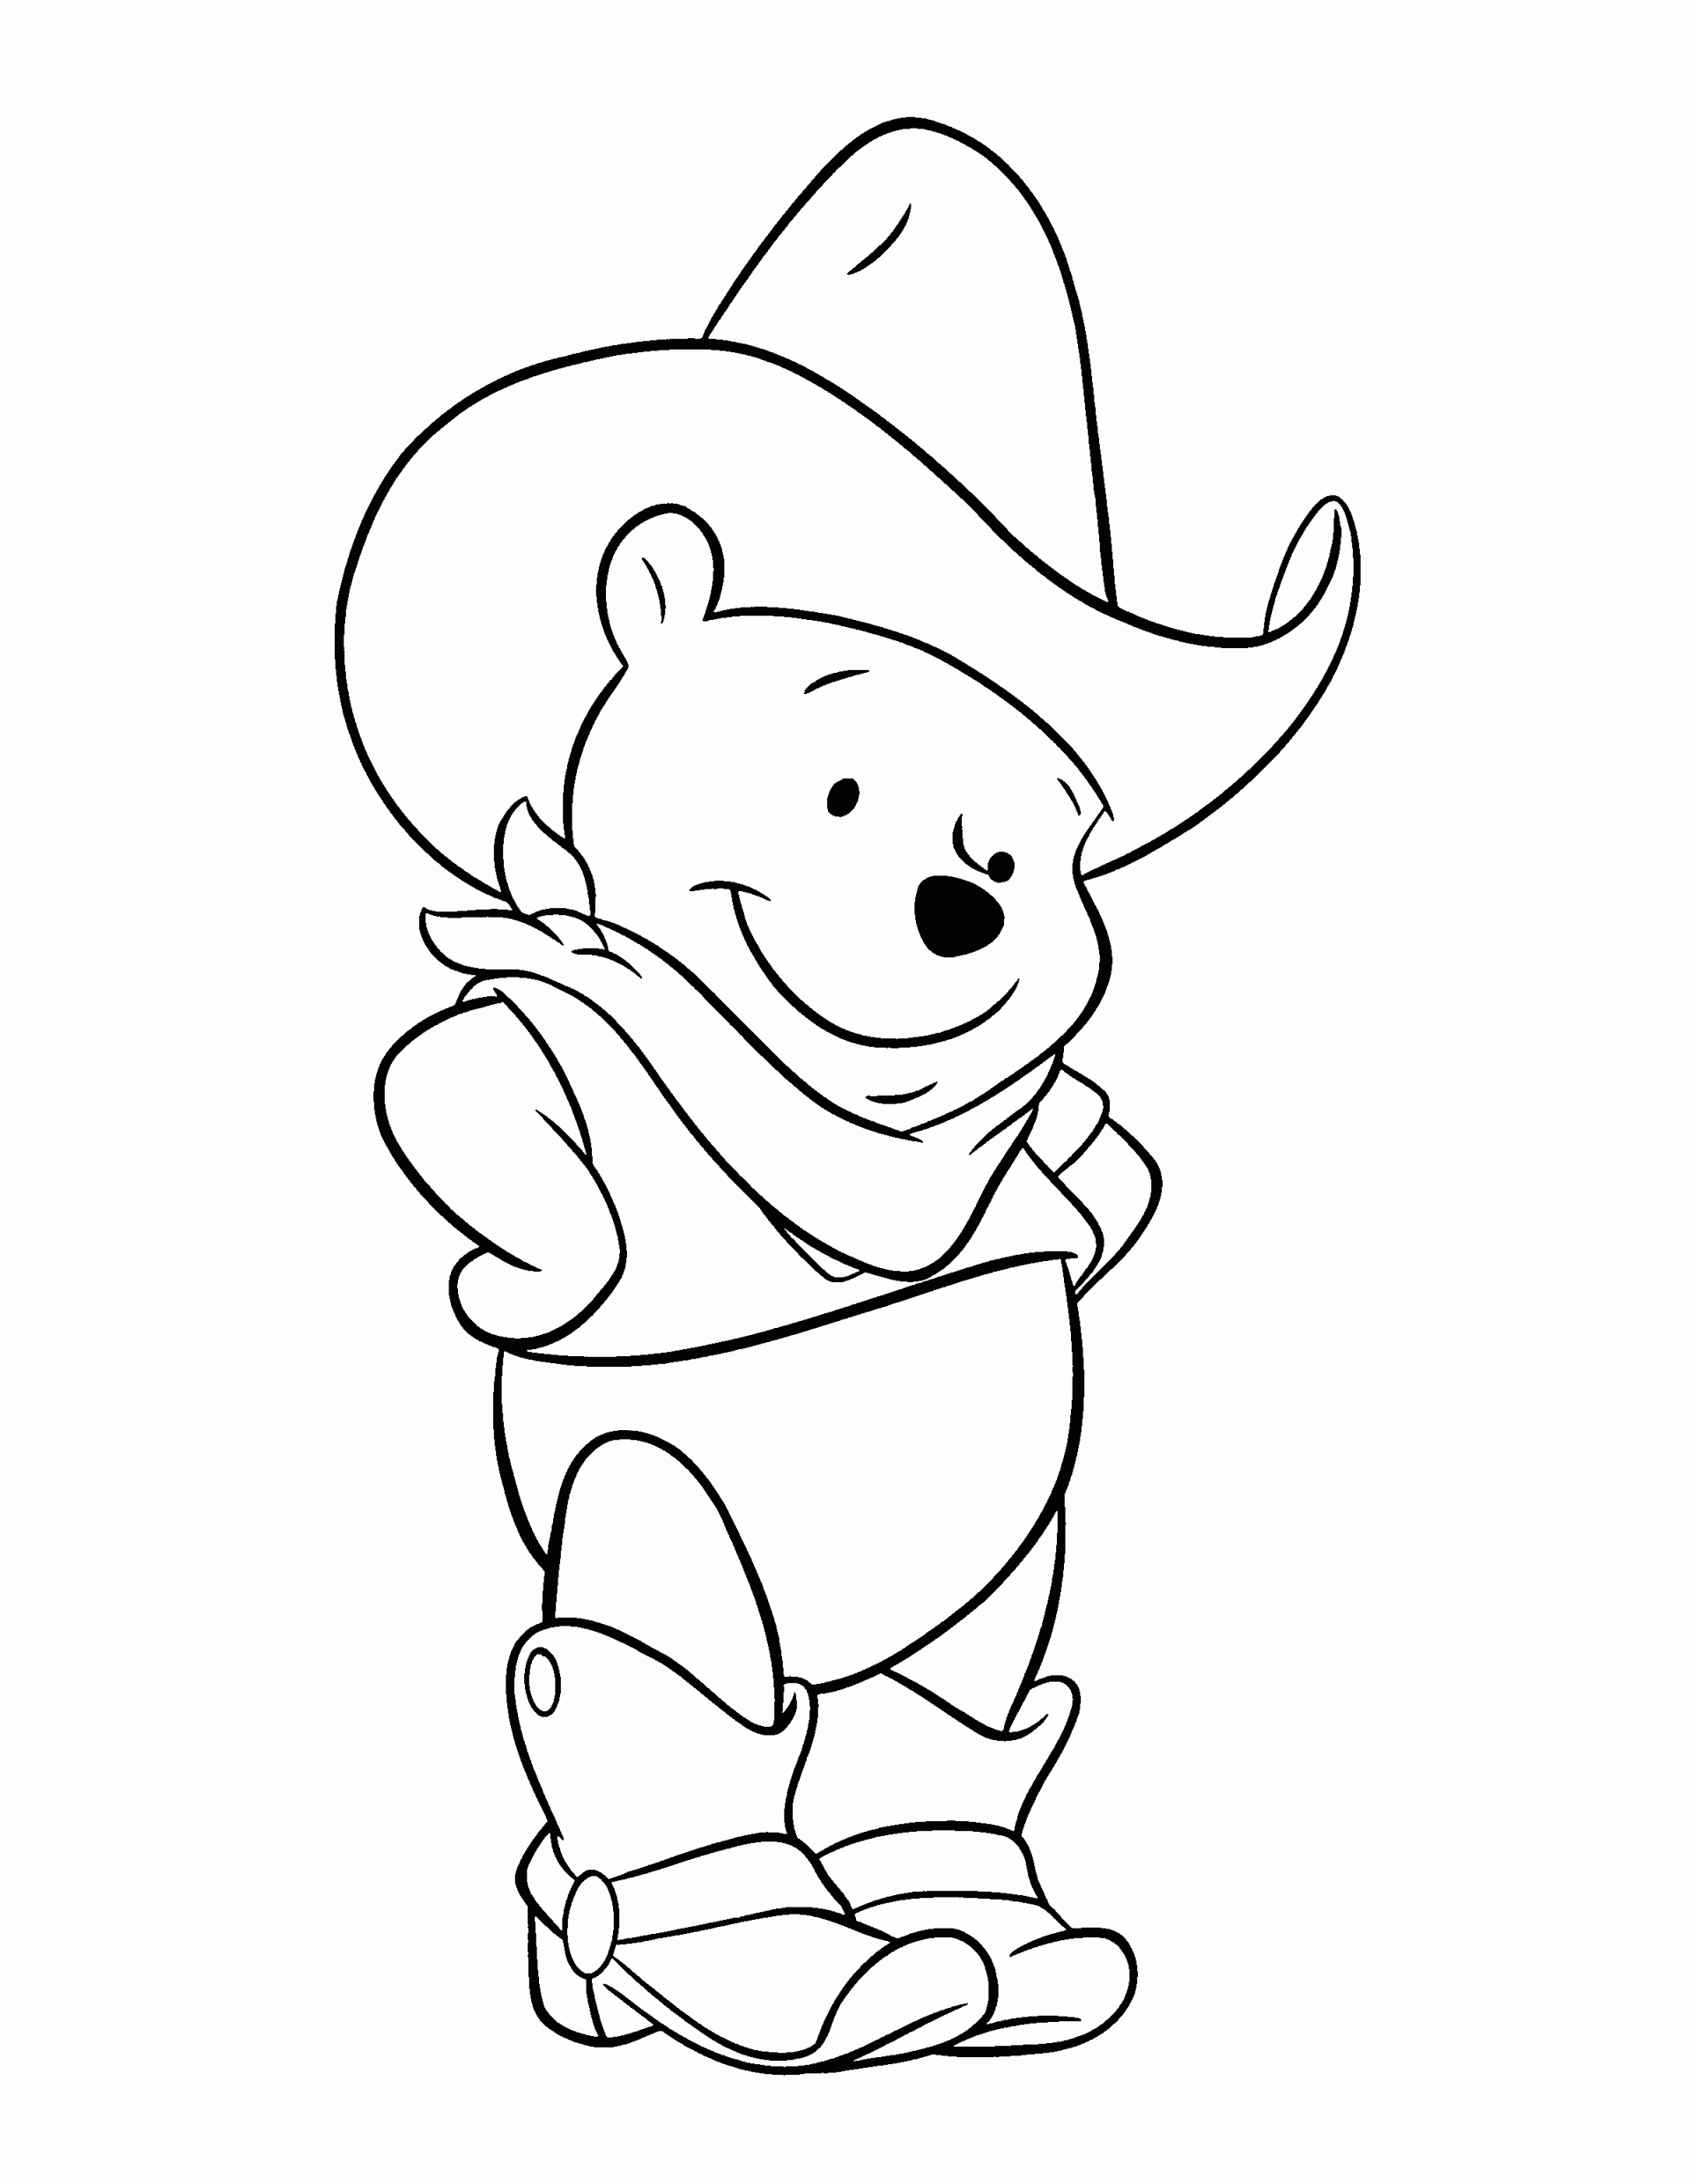 Cartoon Characters Coloring Pictures - Coloring Page Photos